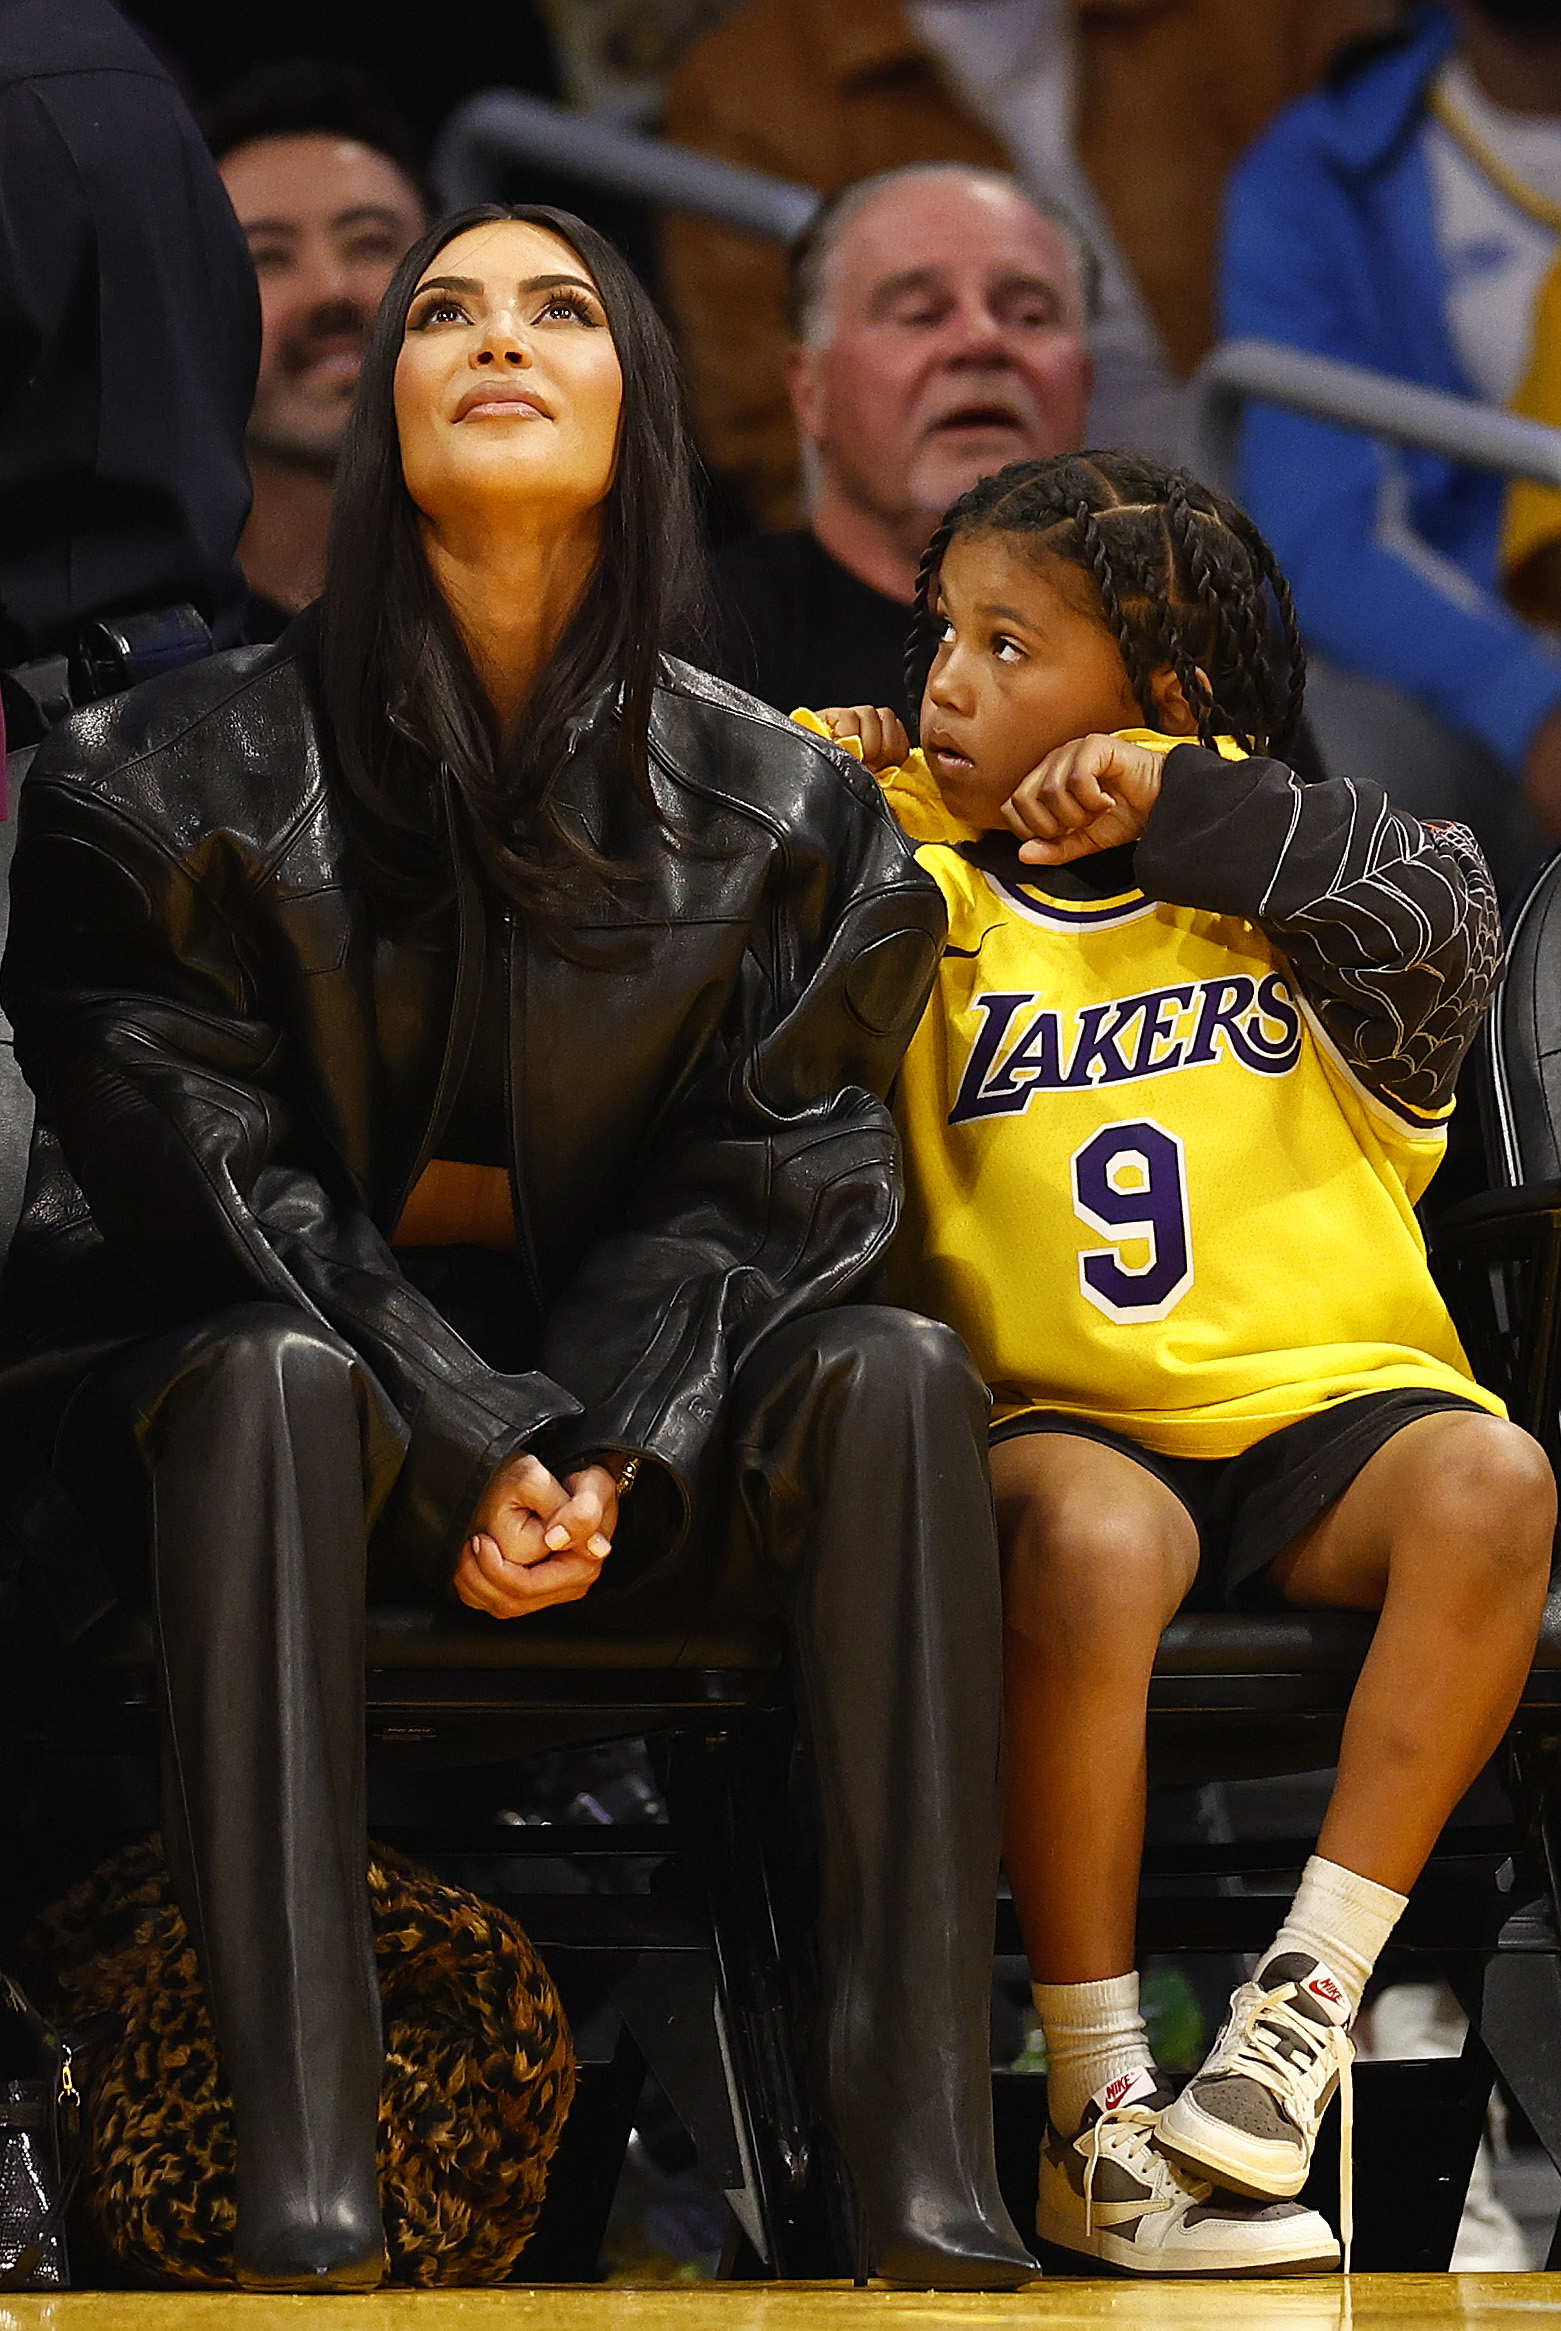 Kim and Saint West in a sports arena audience